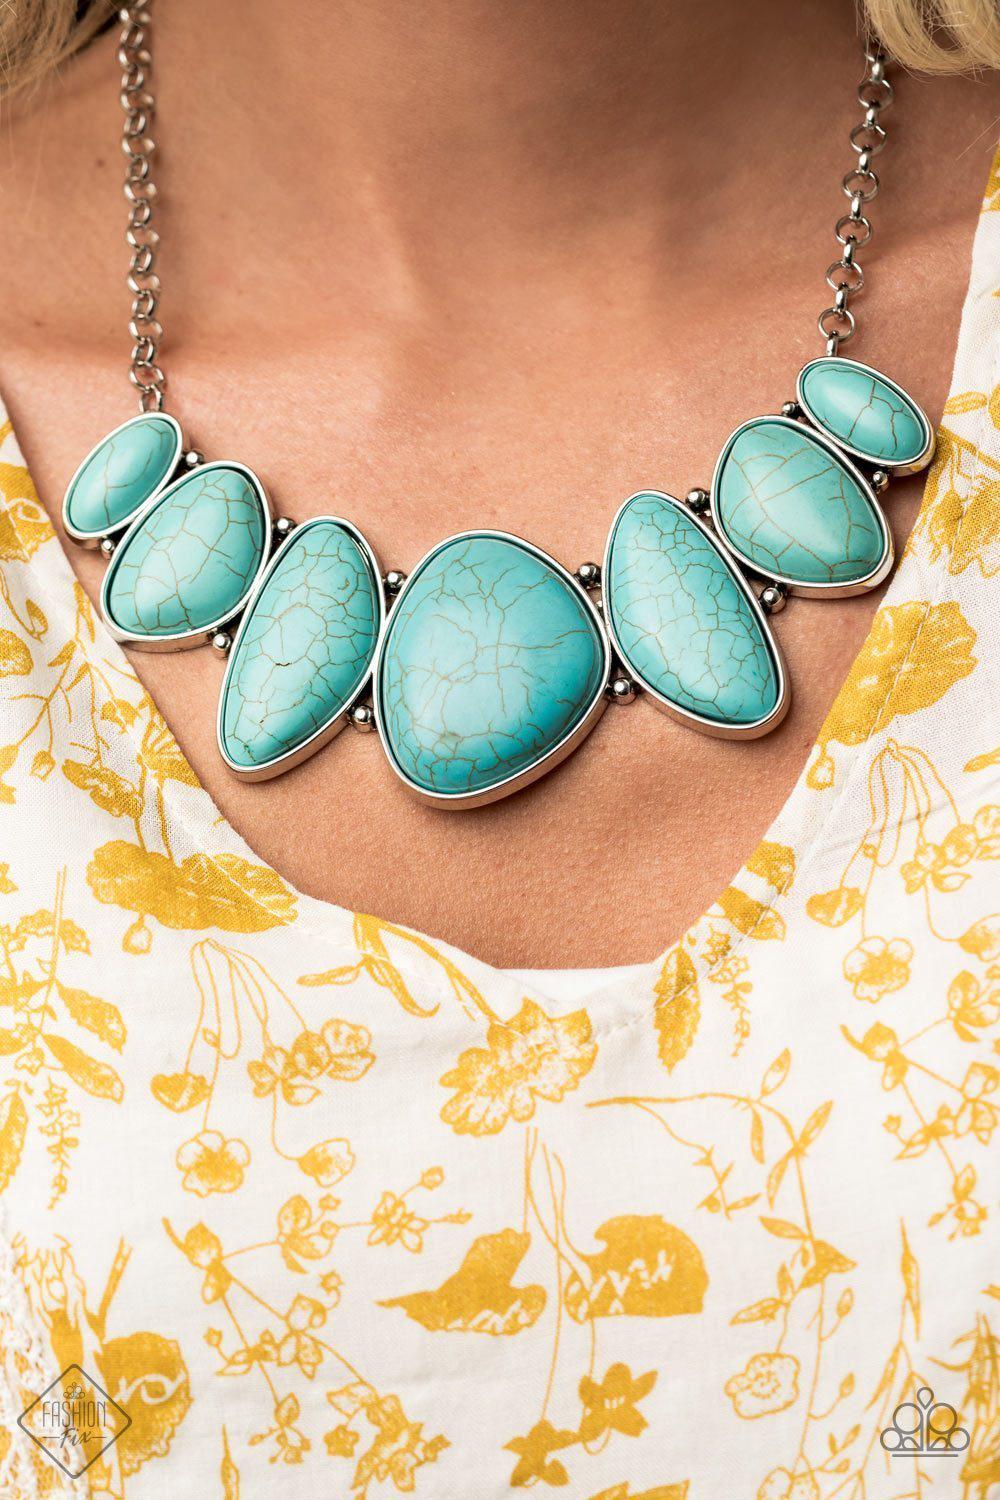 Primitive Turquoise Blue Stone Necklace - Paparazzi Accessories-CarasShop.com - $5 Jewelry by Cara Jewels